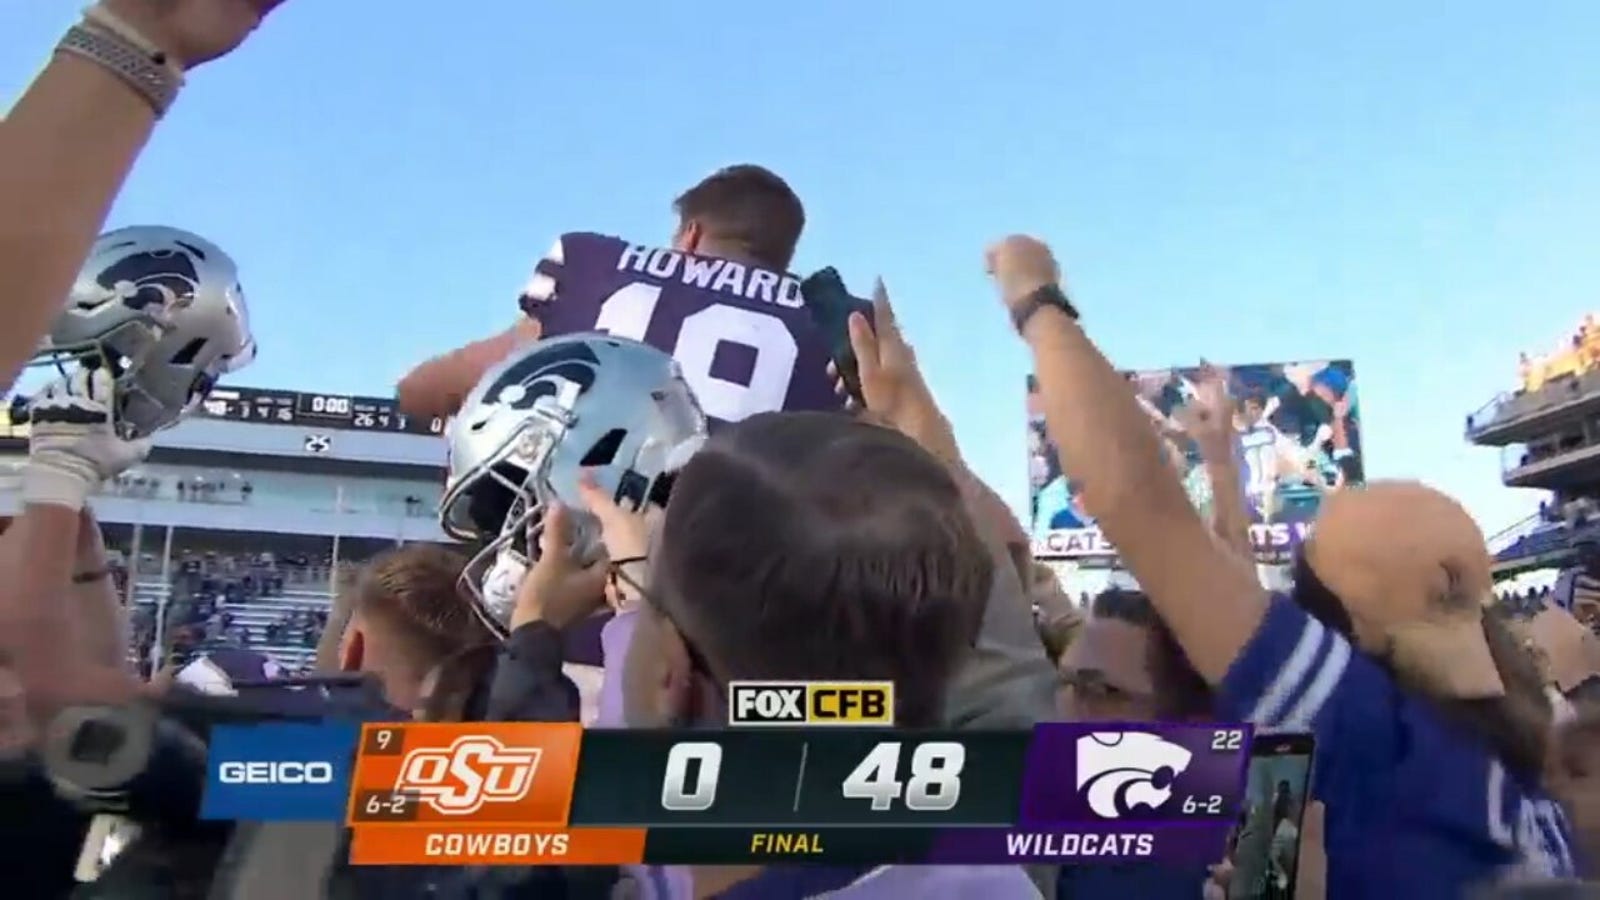 No. 22 Kansas State rushes Bill Snyder Family Stadium after a 48-0 victory in a rout vs.  No. 9 Oklahoma State